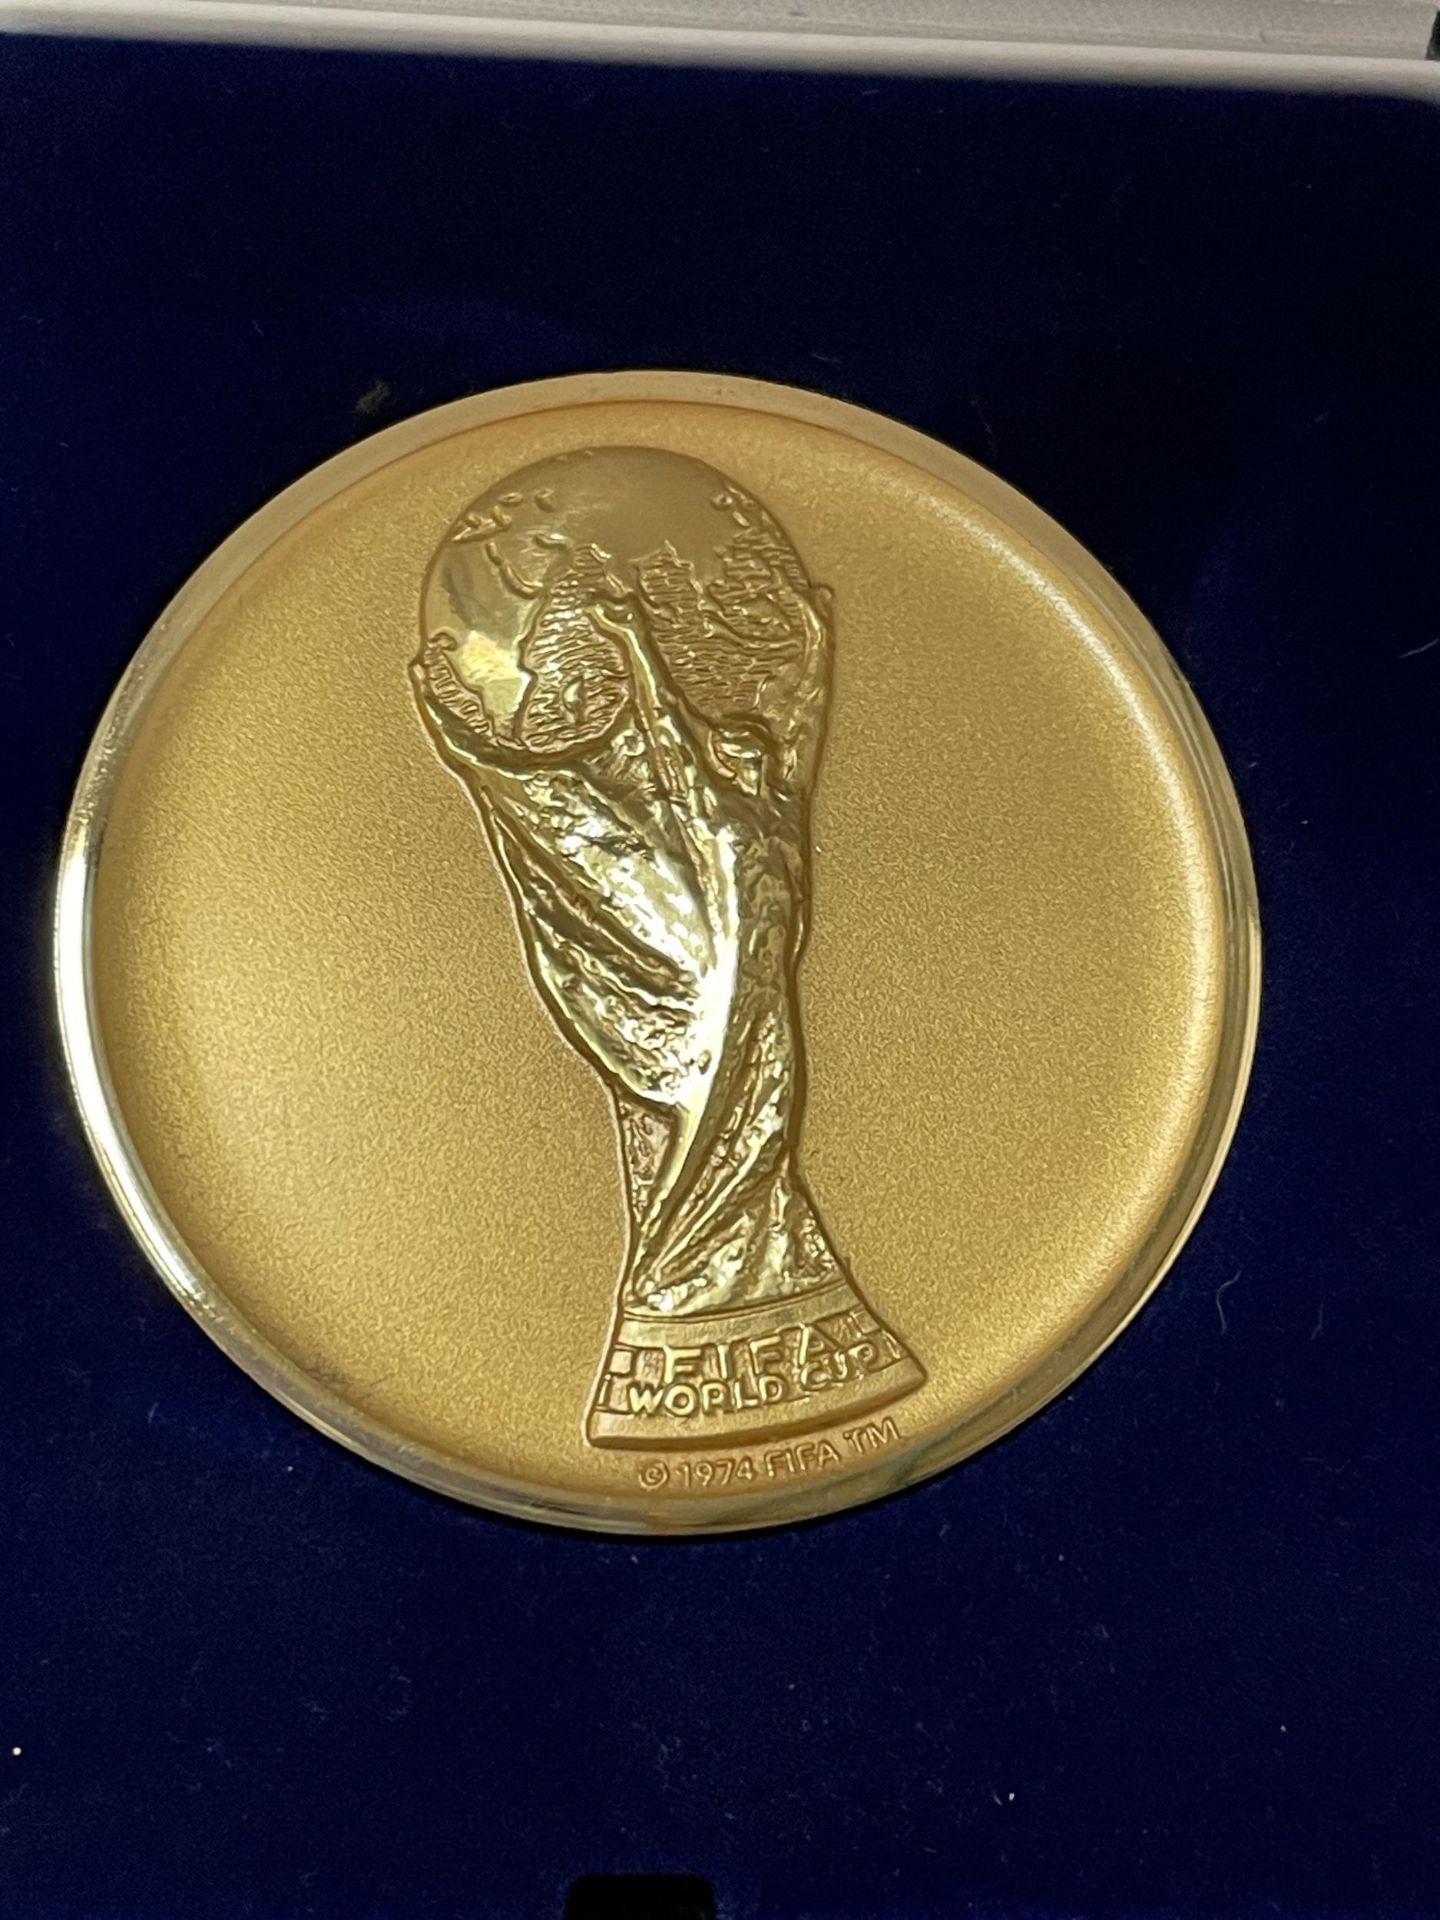 TWO CASED 2006 FIFA WORLD CUP PARTICIPANT FINAL COMPETITION MEDALS BY BERTONI, ITALY AND FURTHER - Image 4 of 5